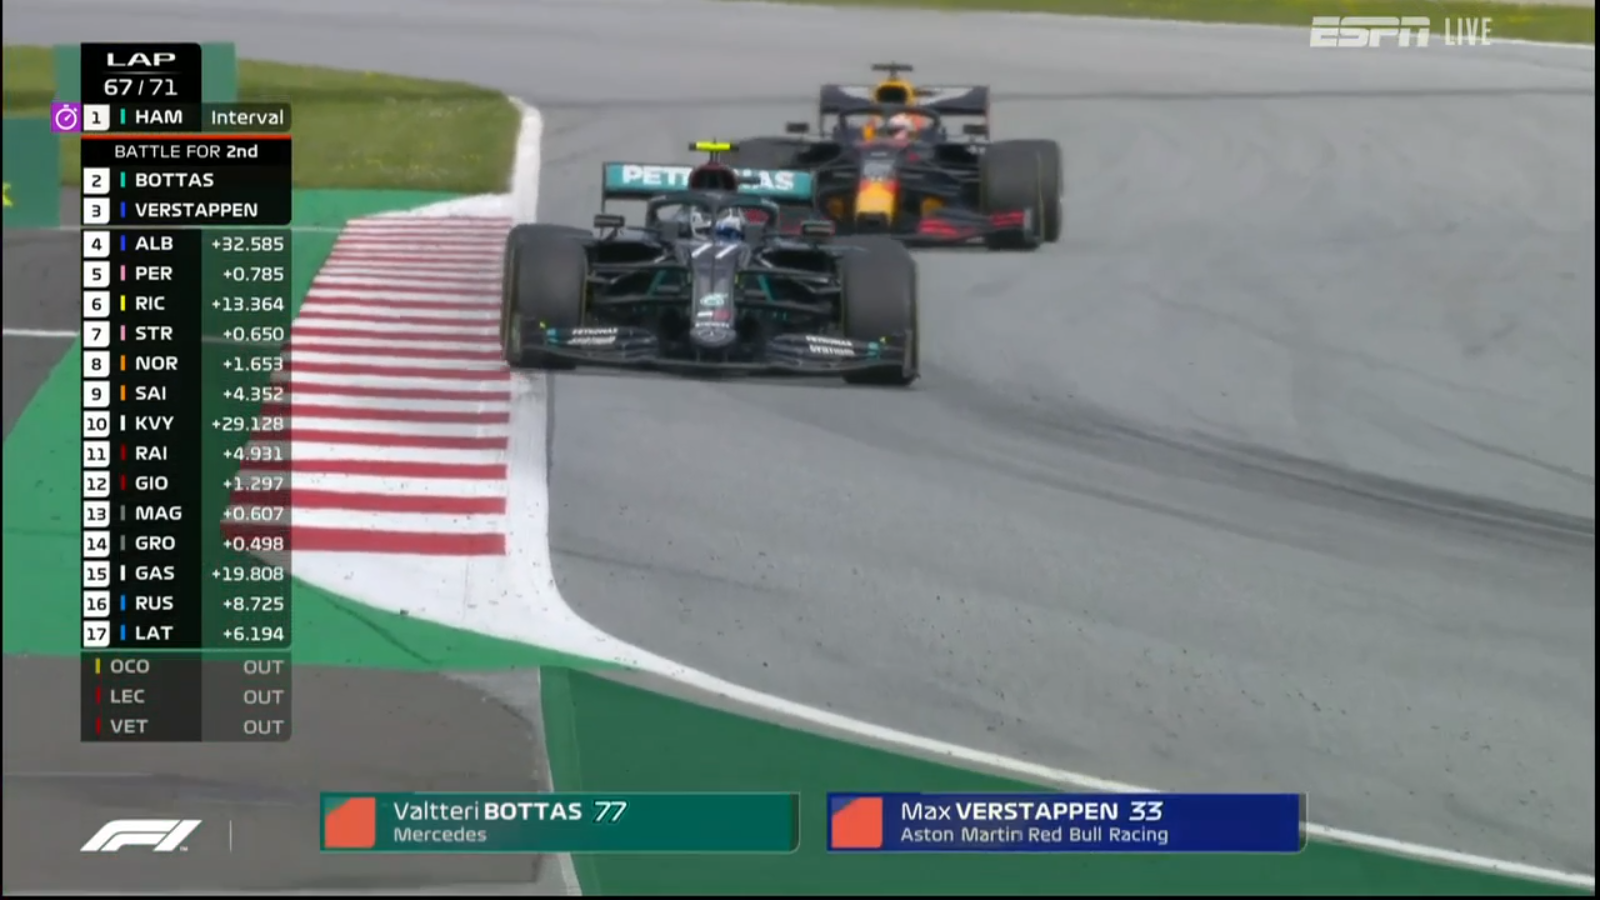 Bottas, with fresher tires, easily overtakes Verstappen for 2nd position.